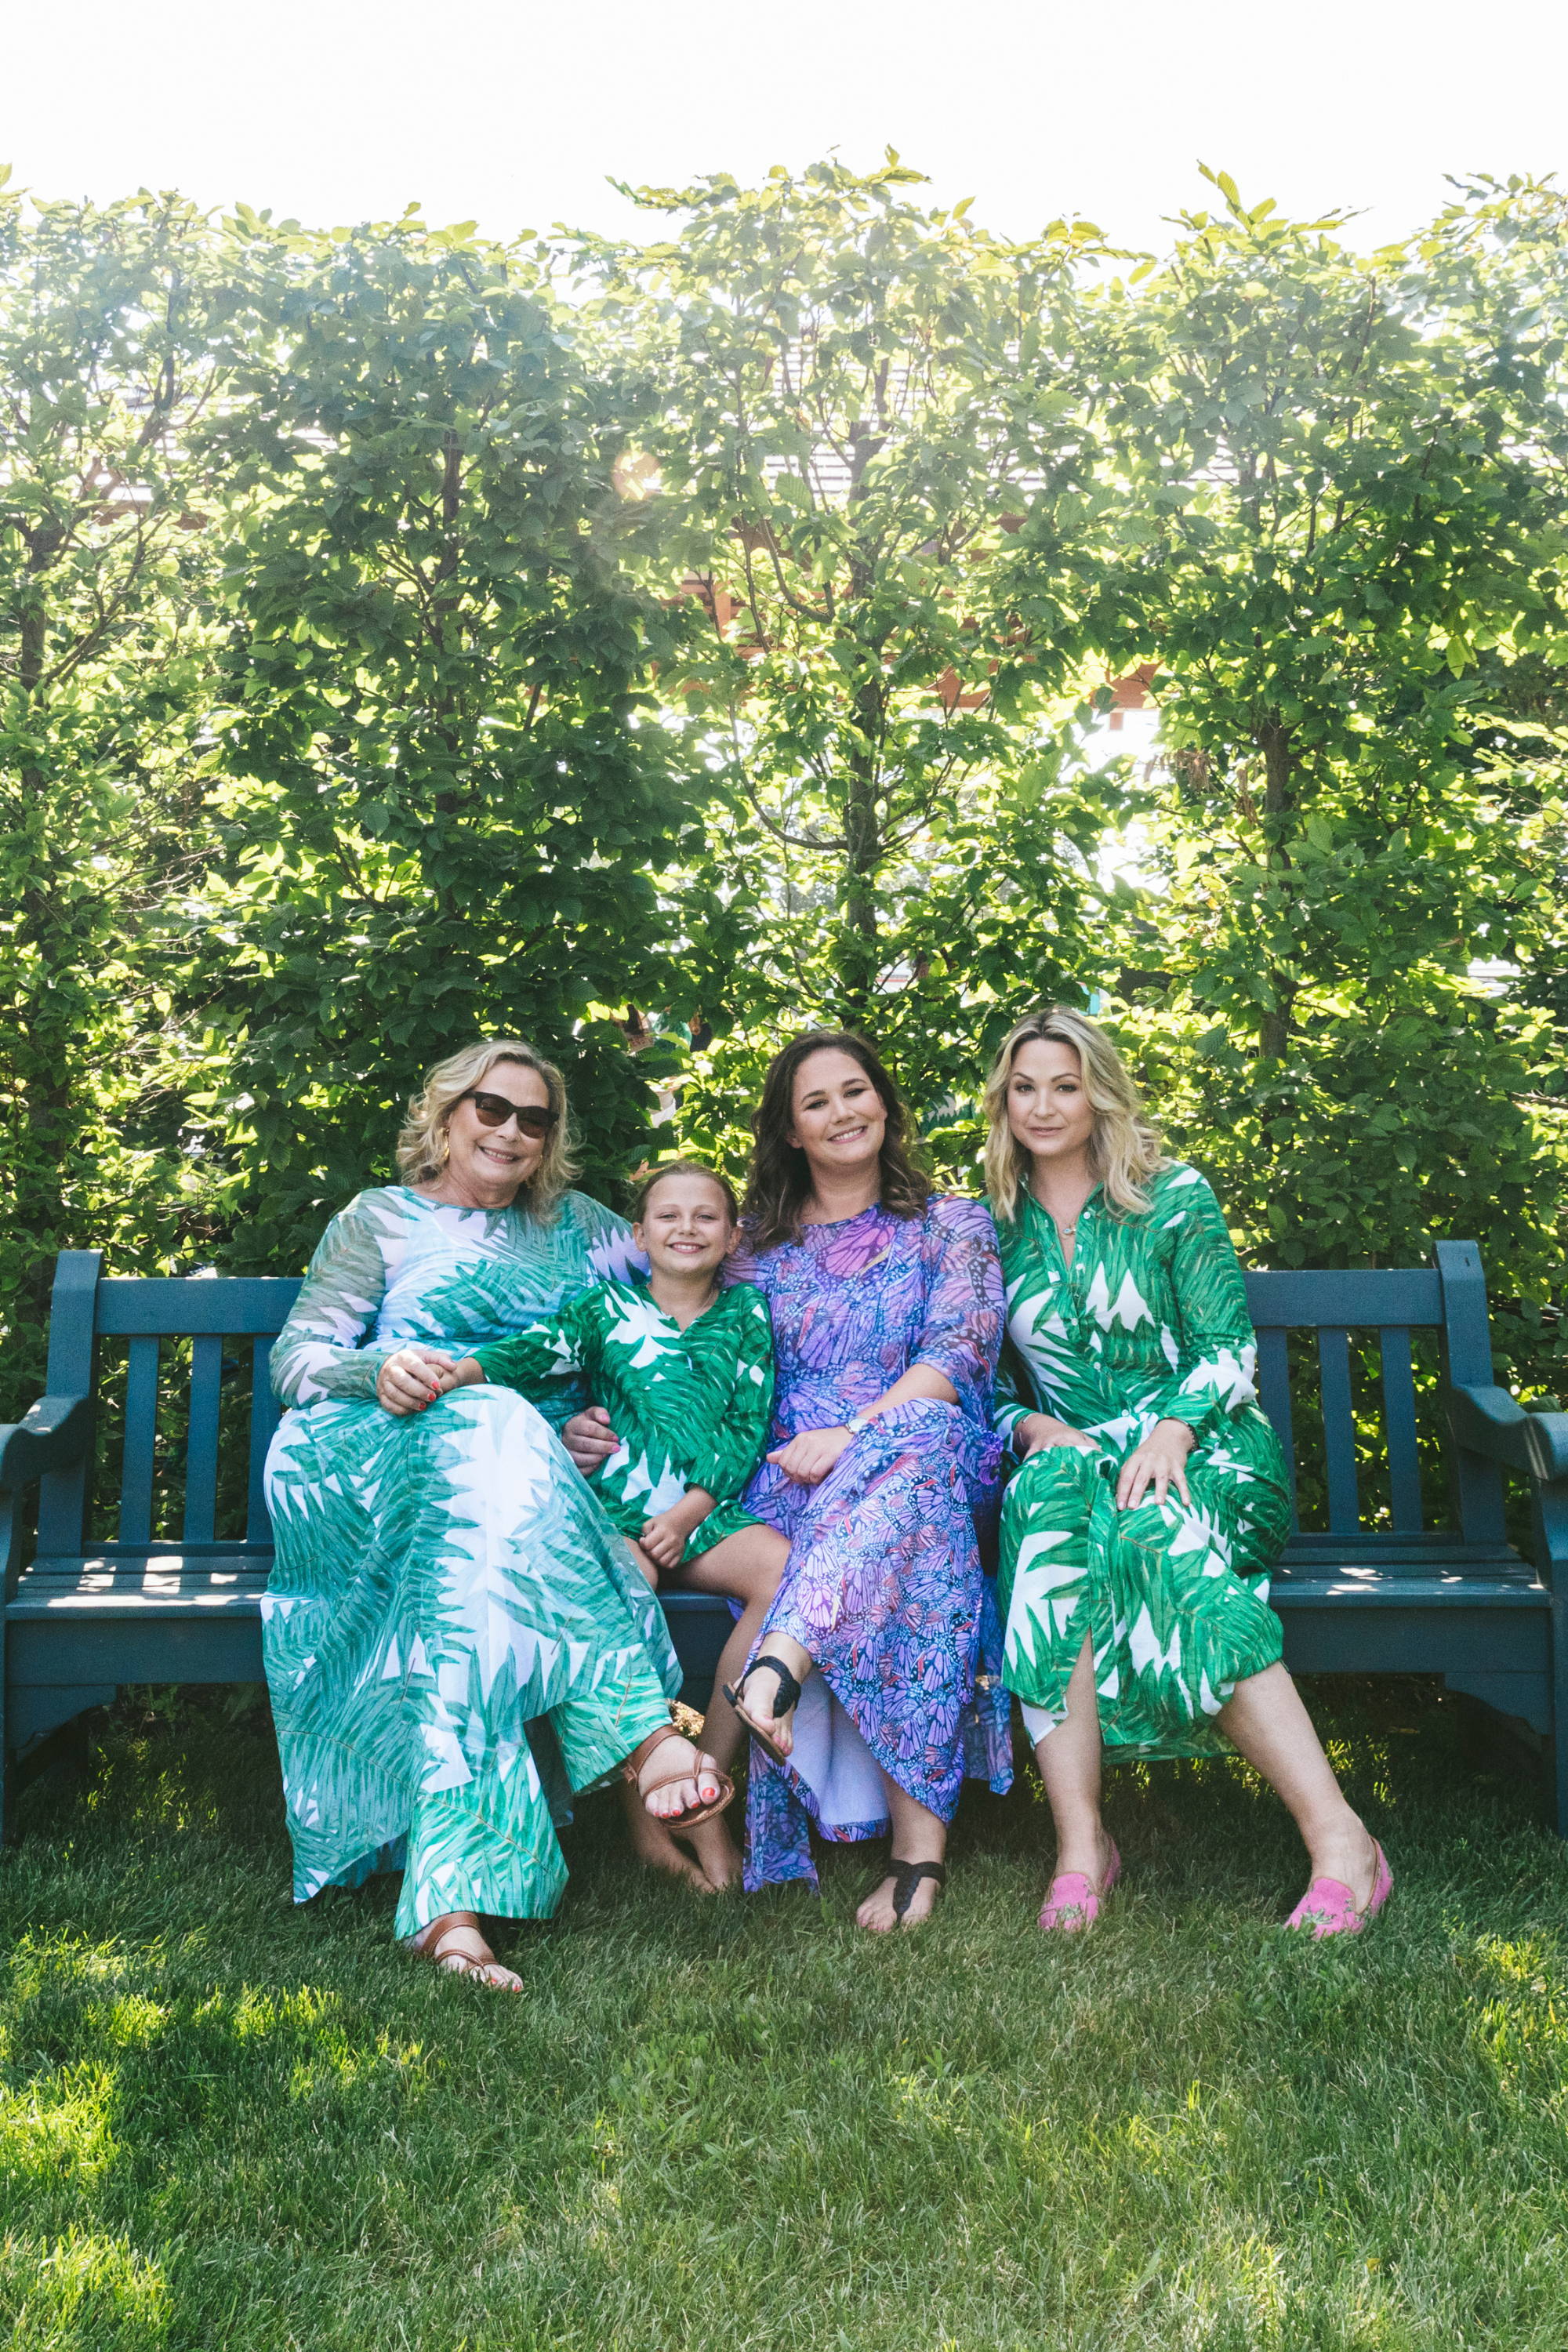 Ala Isham and her daughters wearing mesh kaftans over matching printed stretch knit dresses in Newport, Rhode Island